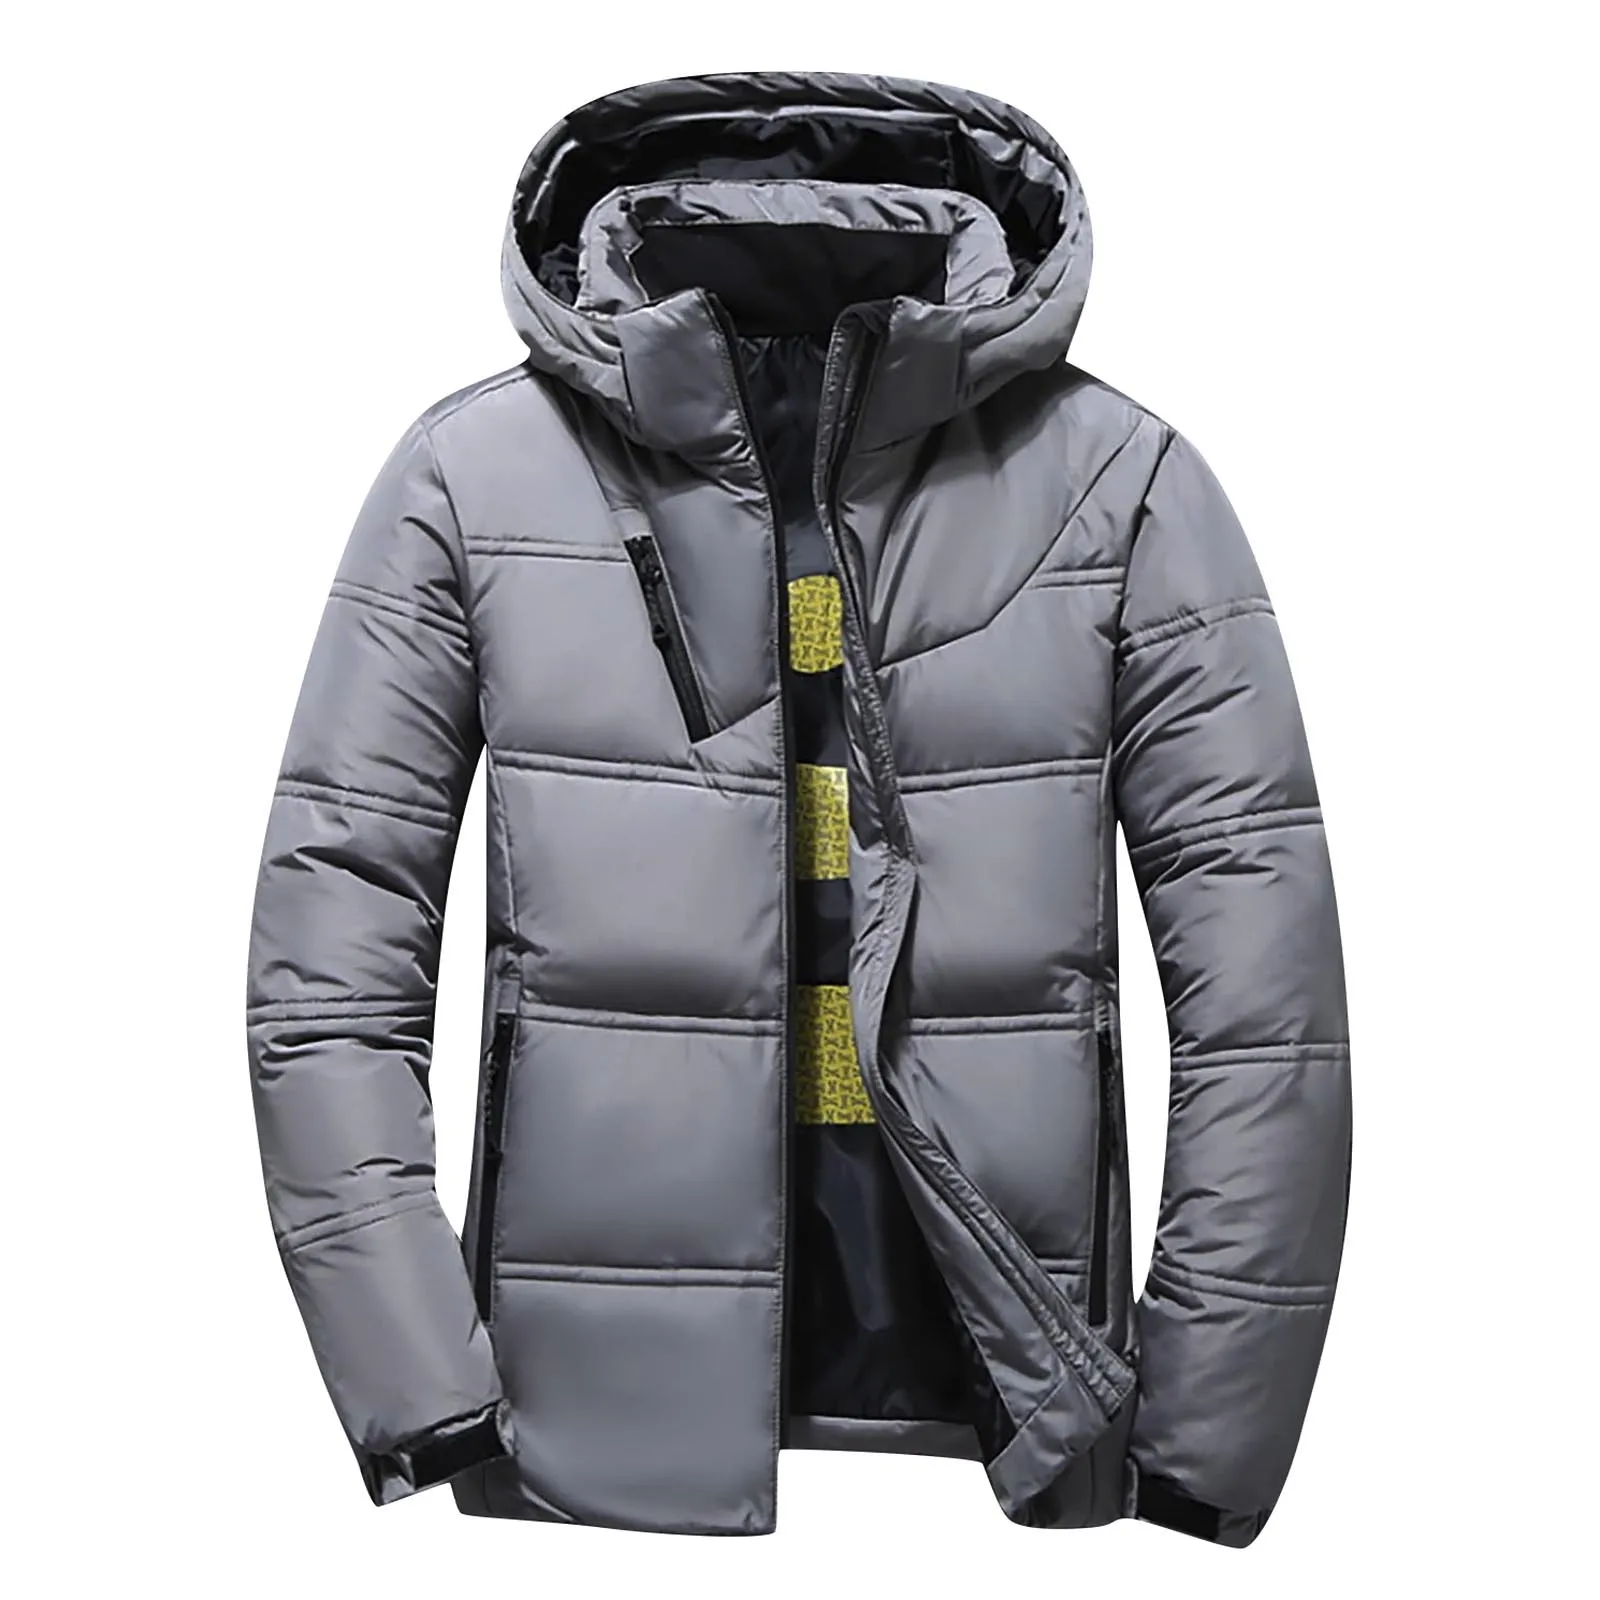 stone island jacket Fashion Men's Autumn And Winter Loose Solid Colors Long Sleeve Cotton Padded Coat Casual Jacket Outerwear Chaquetas Hombre#g3 waterproof jacket Jackets